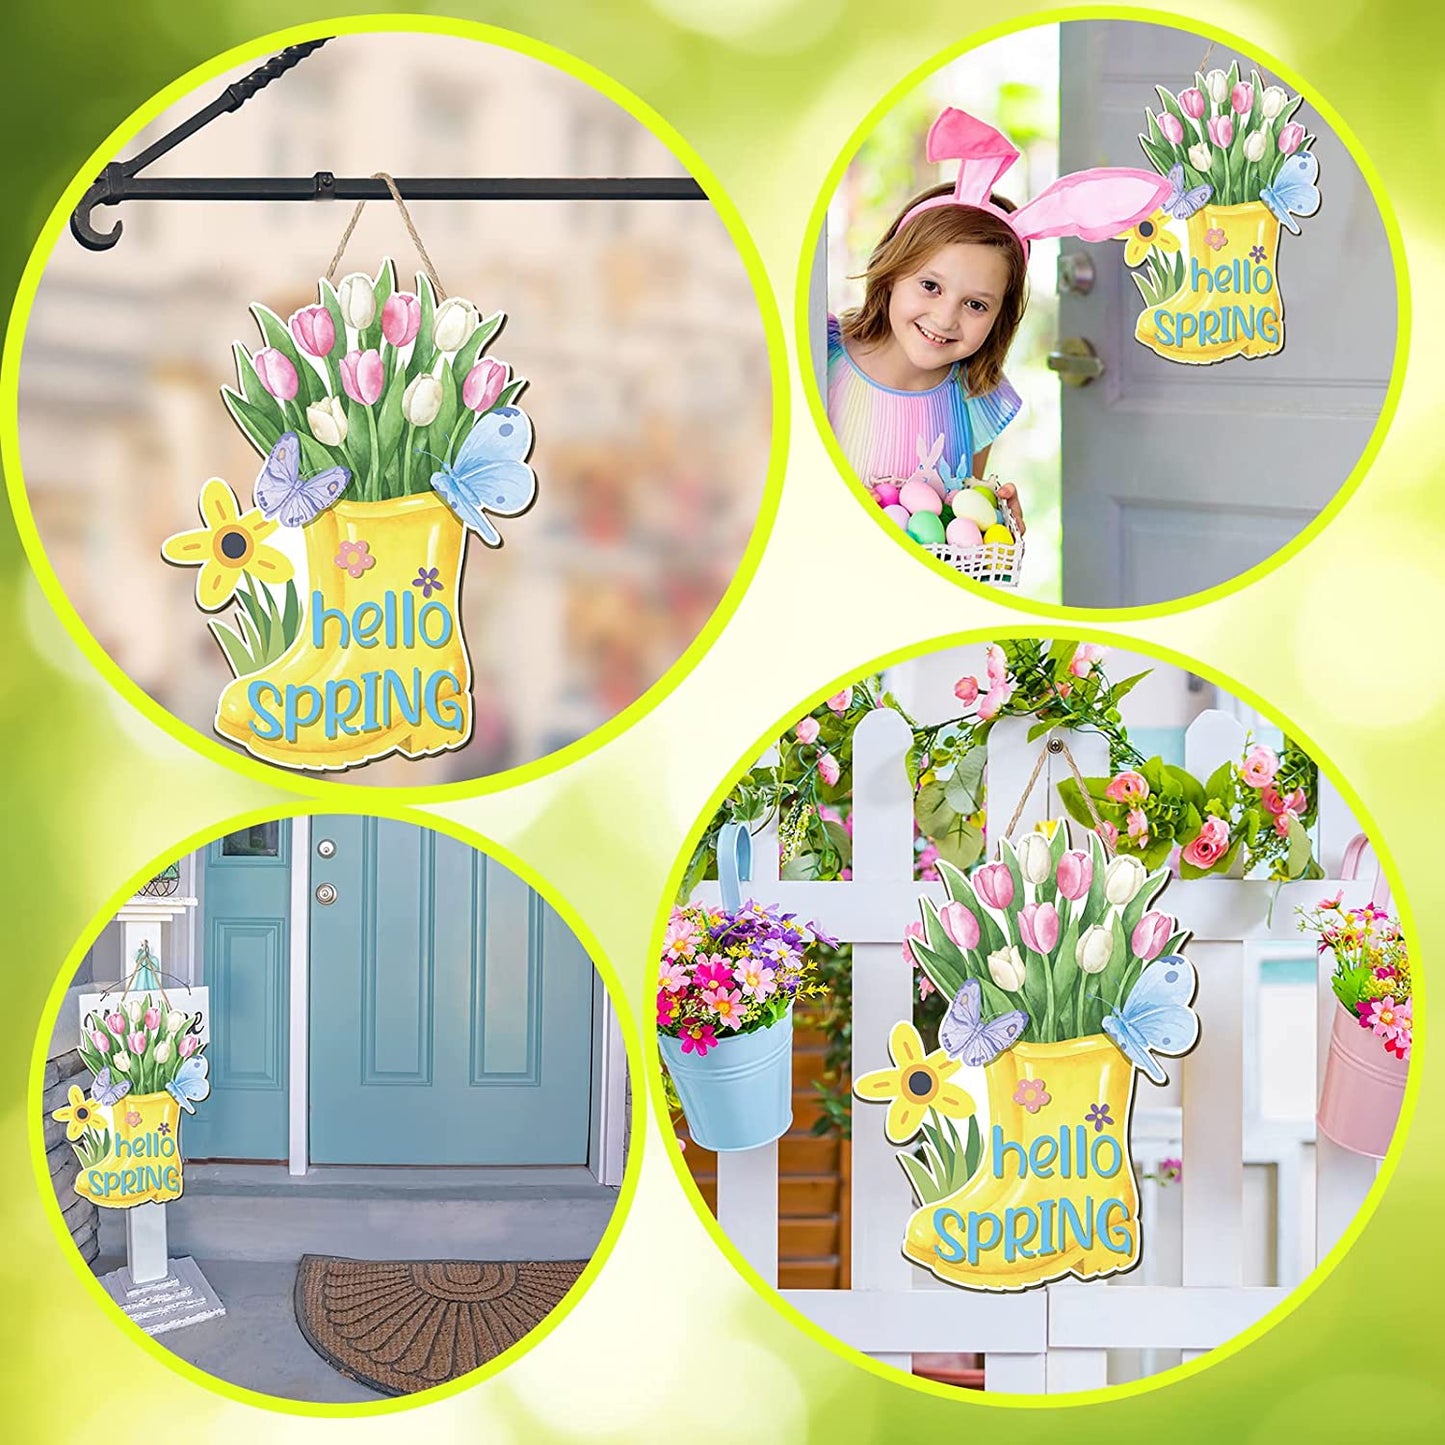 Hello Spring Door Sign Colorful Tulip Flowers Spring Decor Sign Hanging Door Signs Rustic Wall Decor Farmhouse Wood Hanging Plaque for Home Farmhouse Home (Boots)